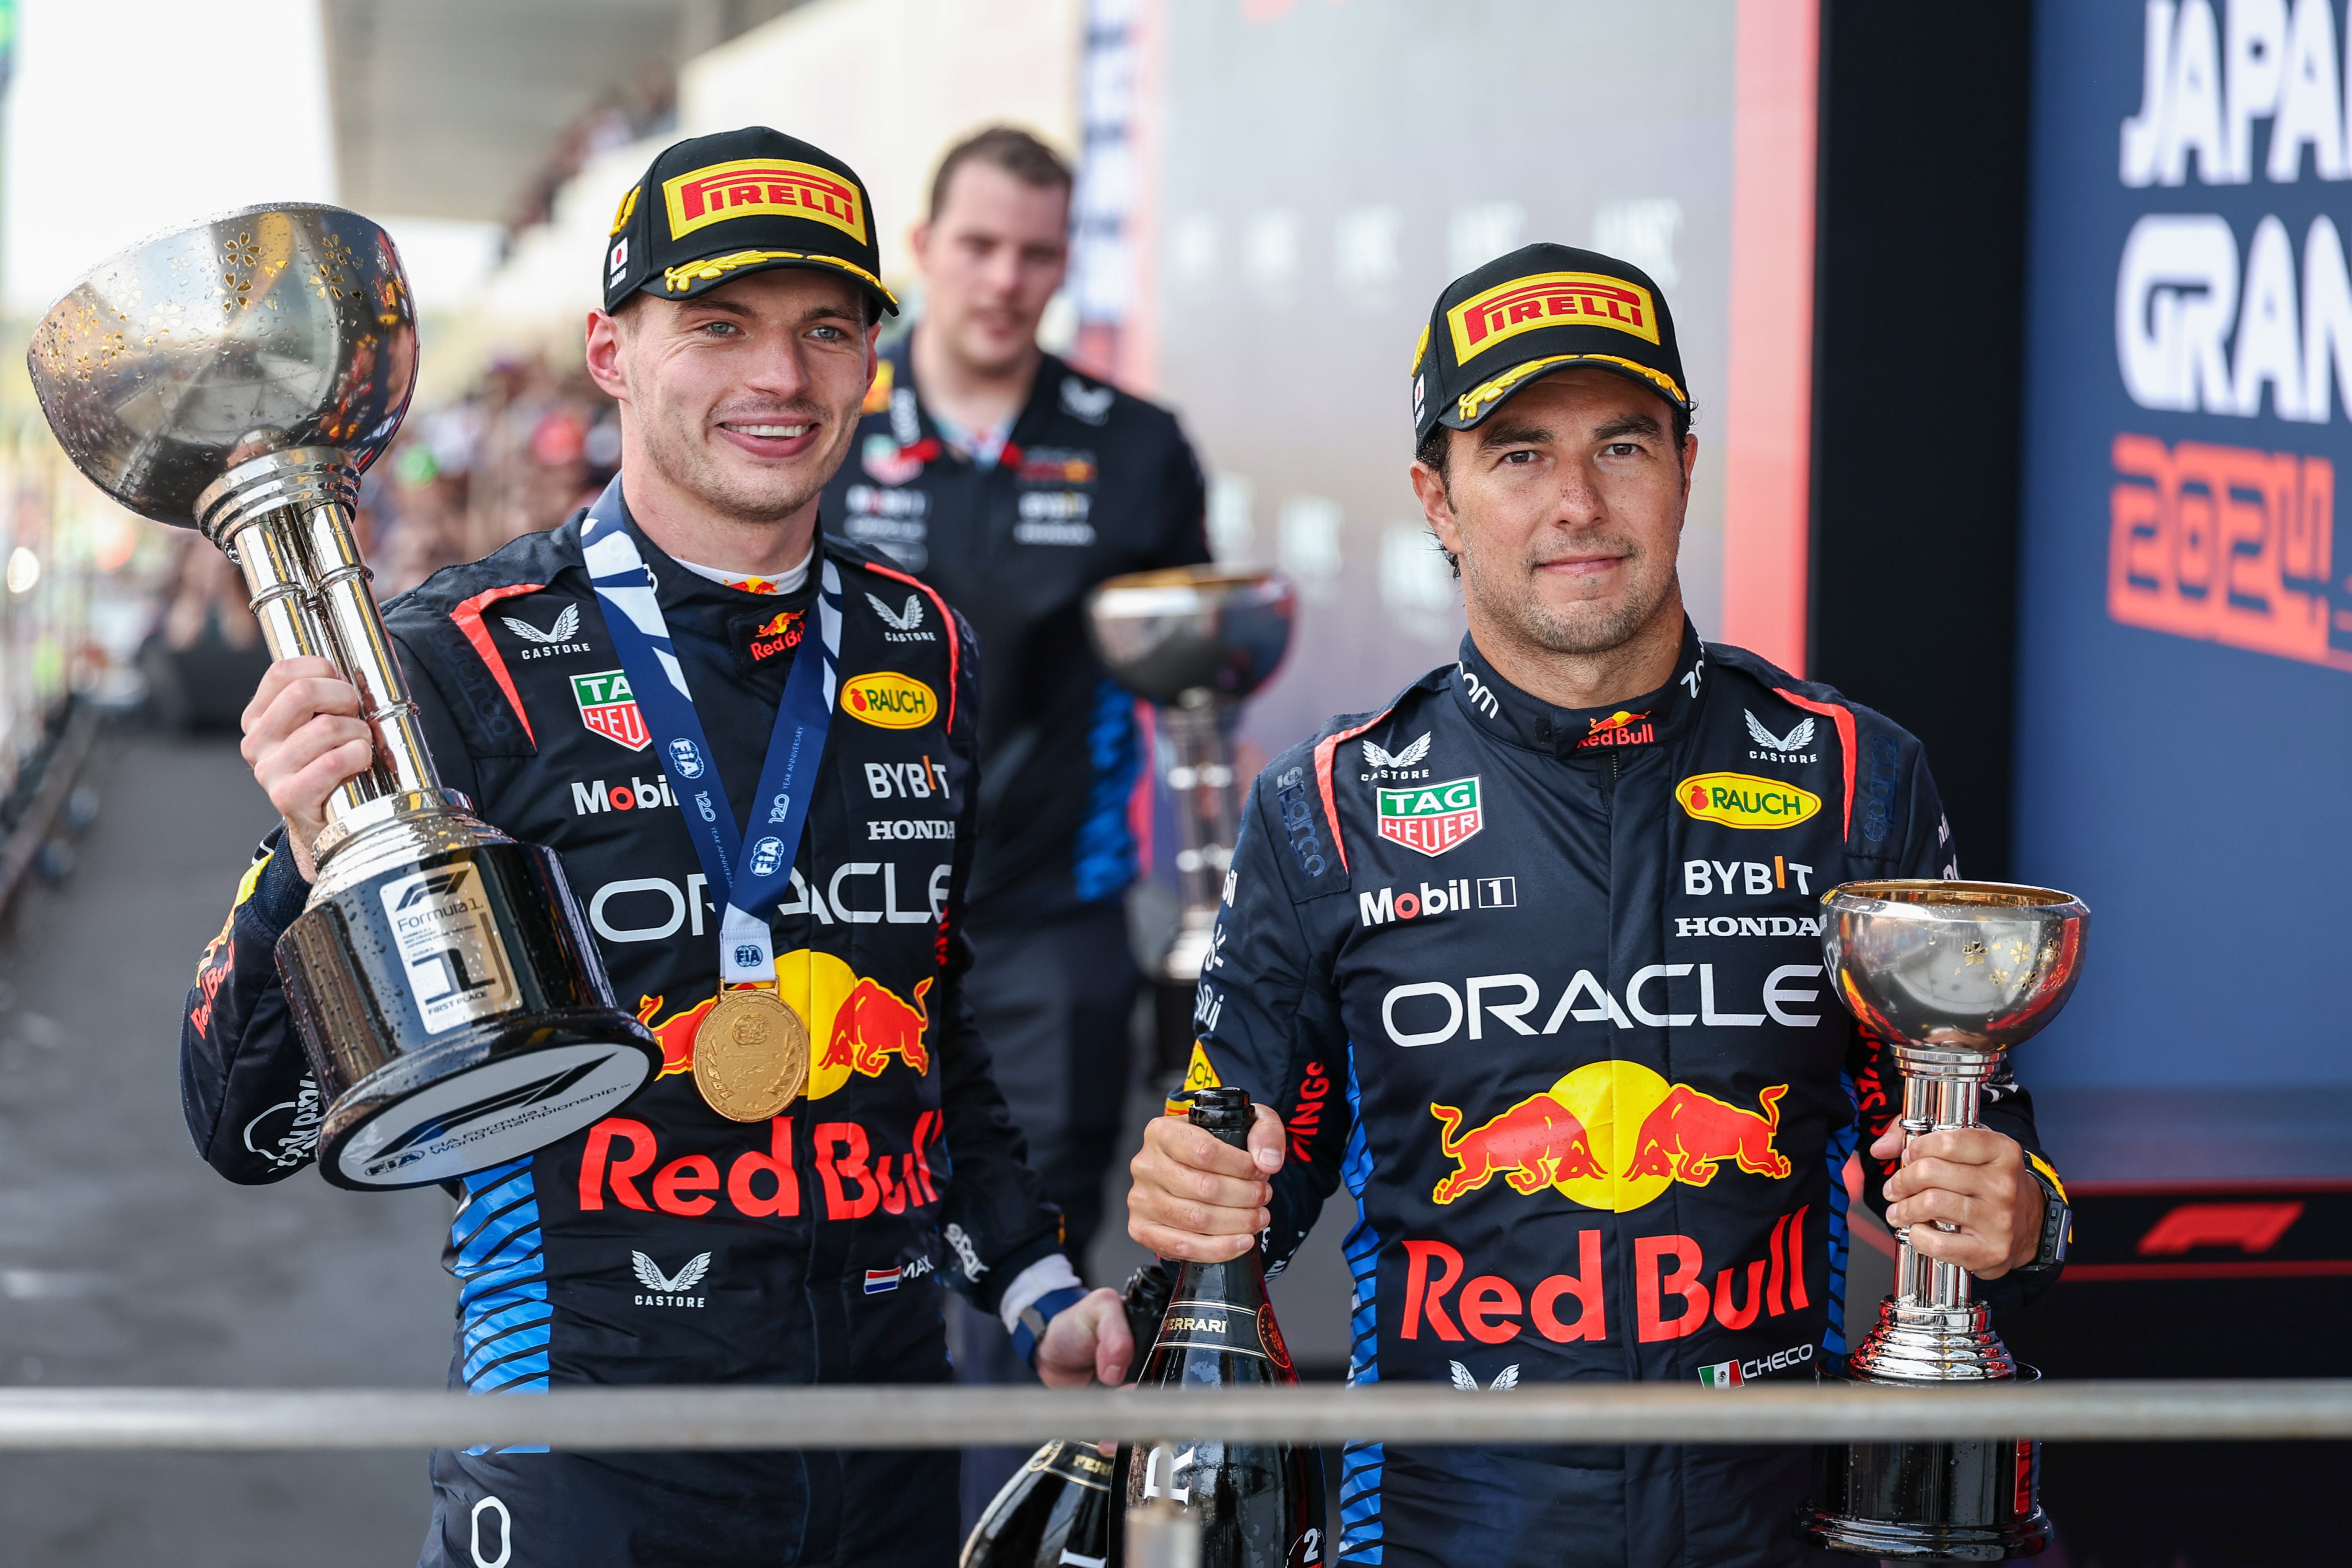 Red Bull’s Max Verstappen (left) with second-placed teammate, Sergio Perez, after the award ceremony for the Japanese Grand Prix at Suzuka on Sunday. Photo: Xinhua